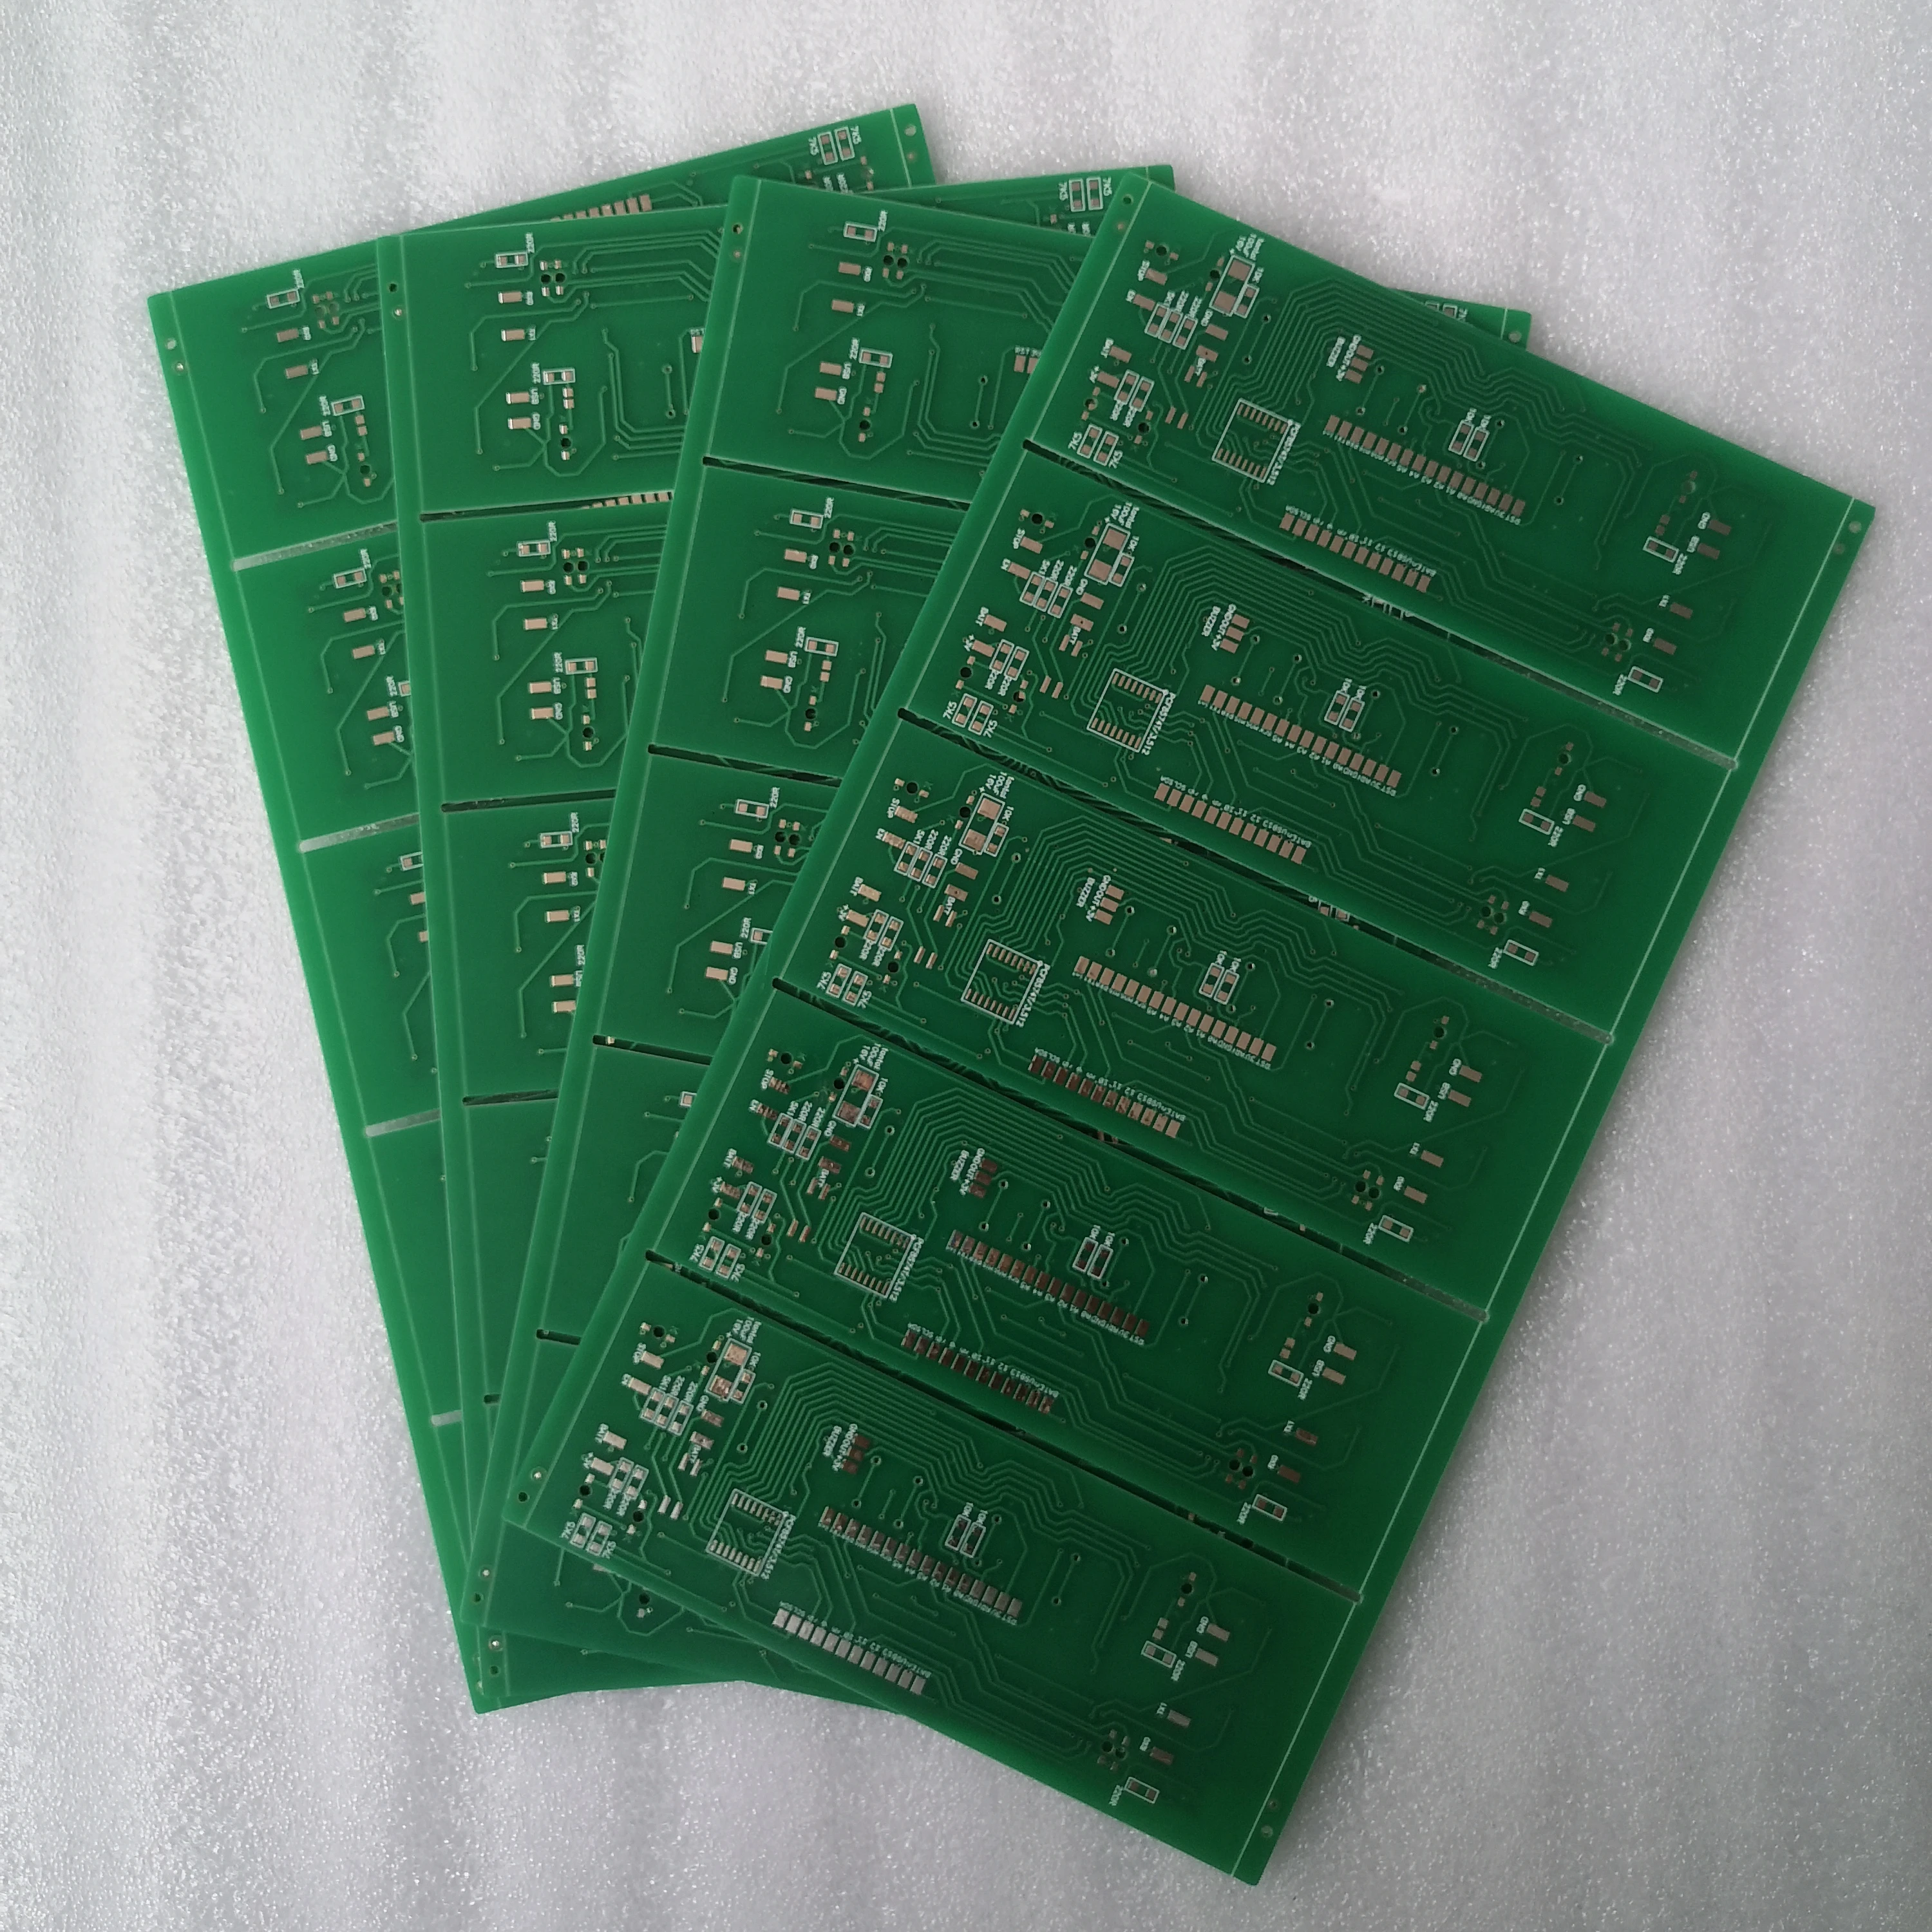 shenzhen 10 years professional oem single double industry electronics circuit board multi-layer pcb pcba  smt dip factory